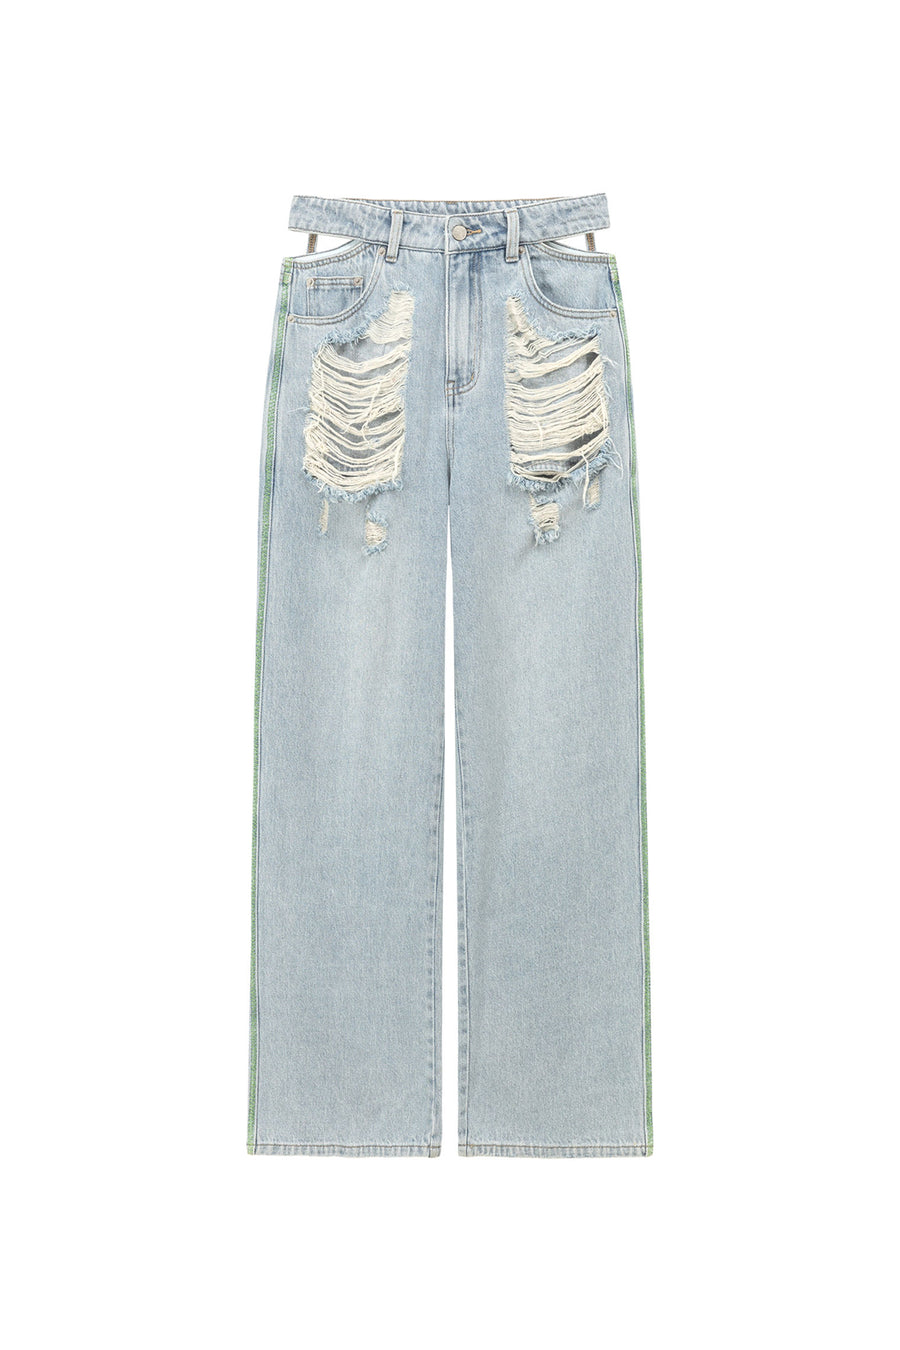 CHUU Side Slit Distressed Ripped Baggy Denim Jeans